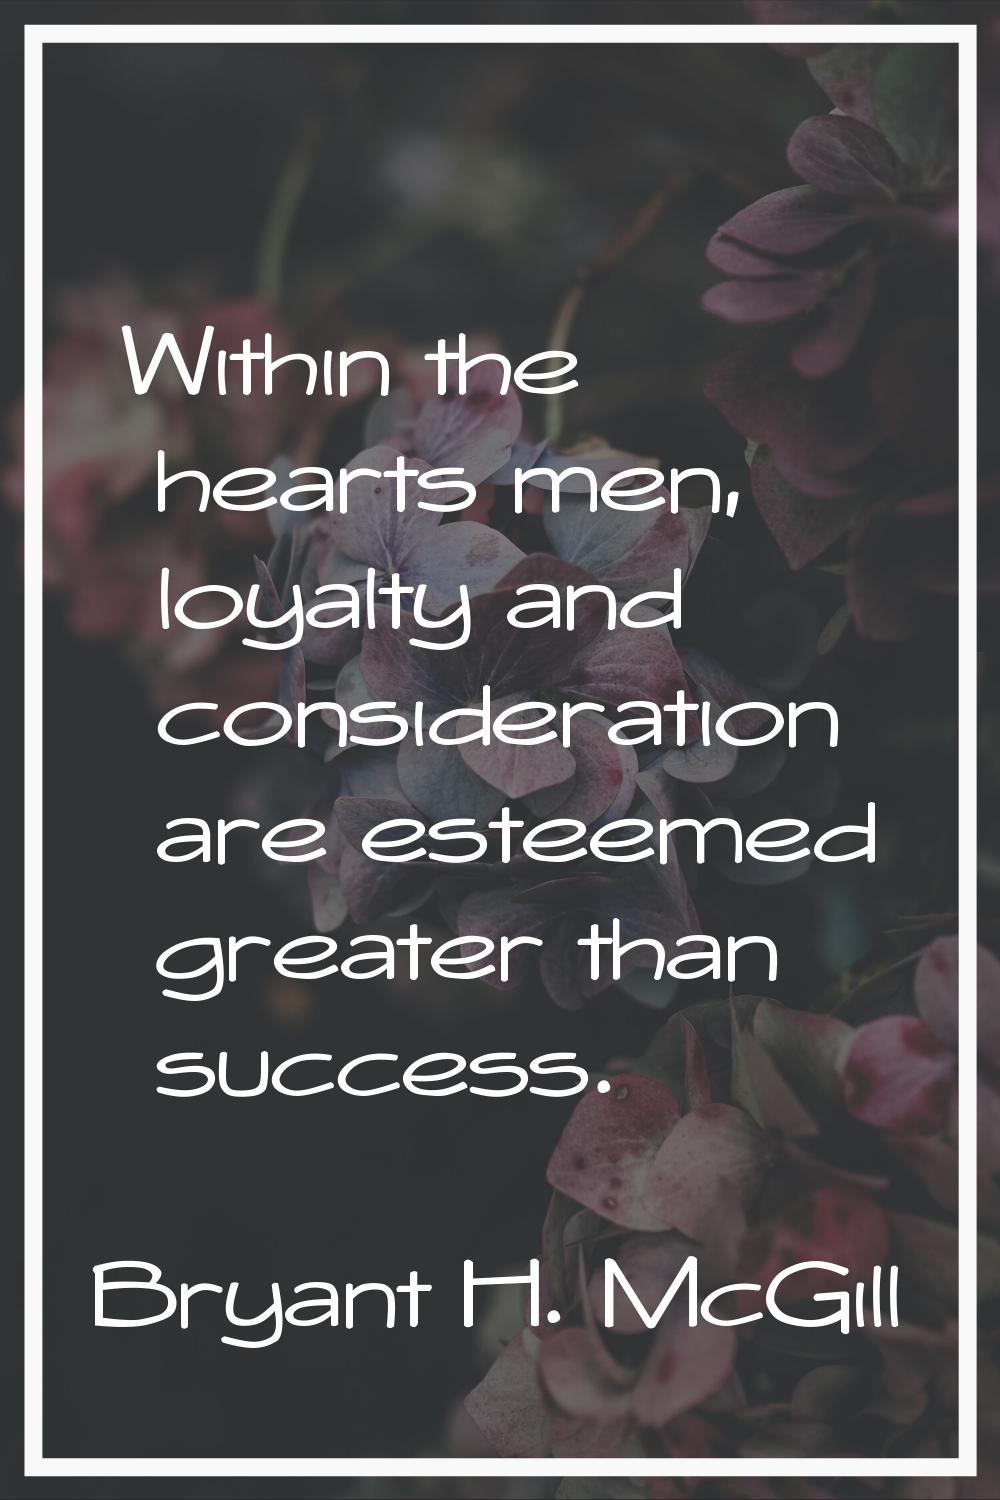 Within the hearts men, loyalty and consideration are esteemed greater than success.